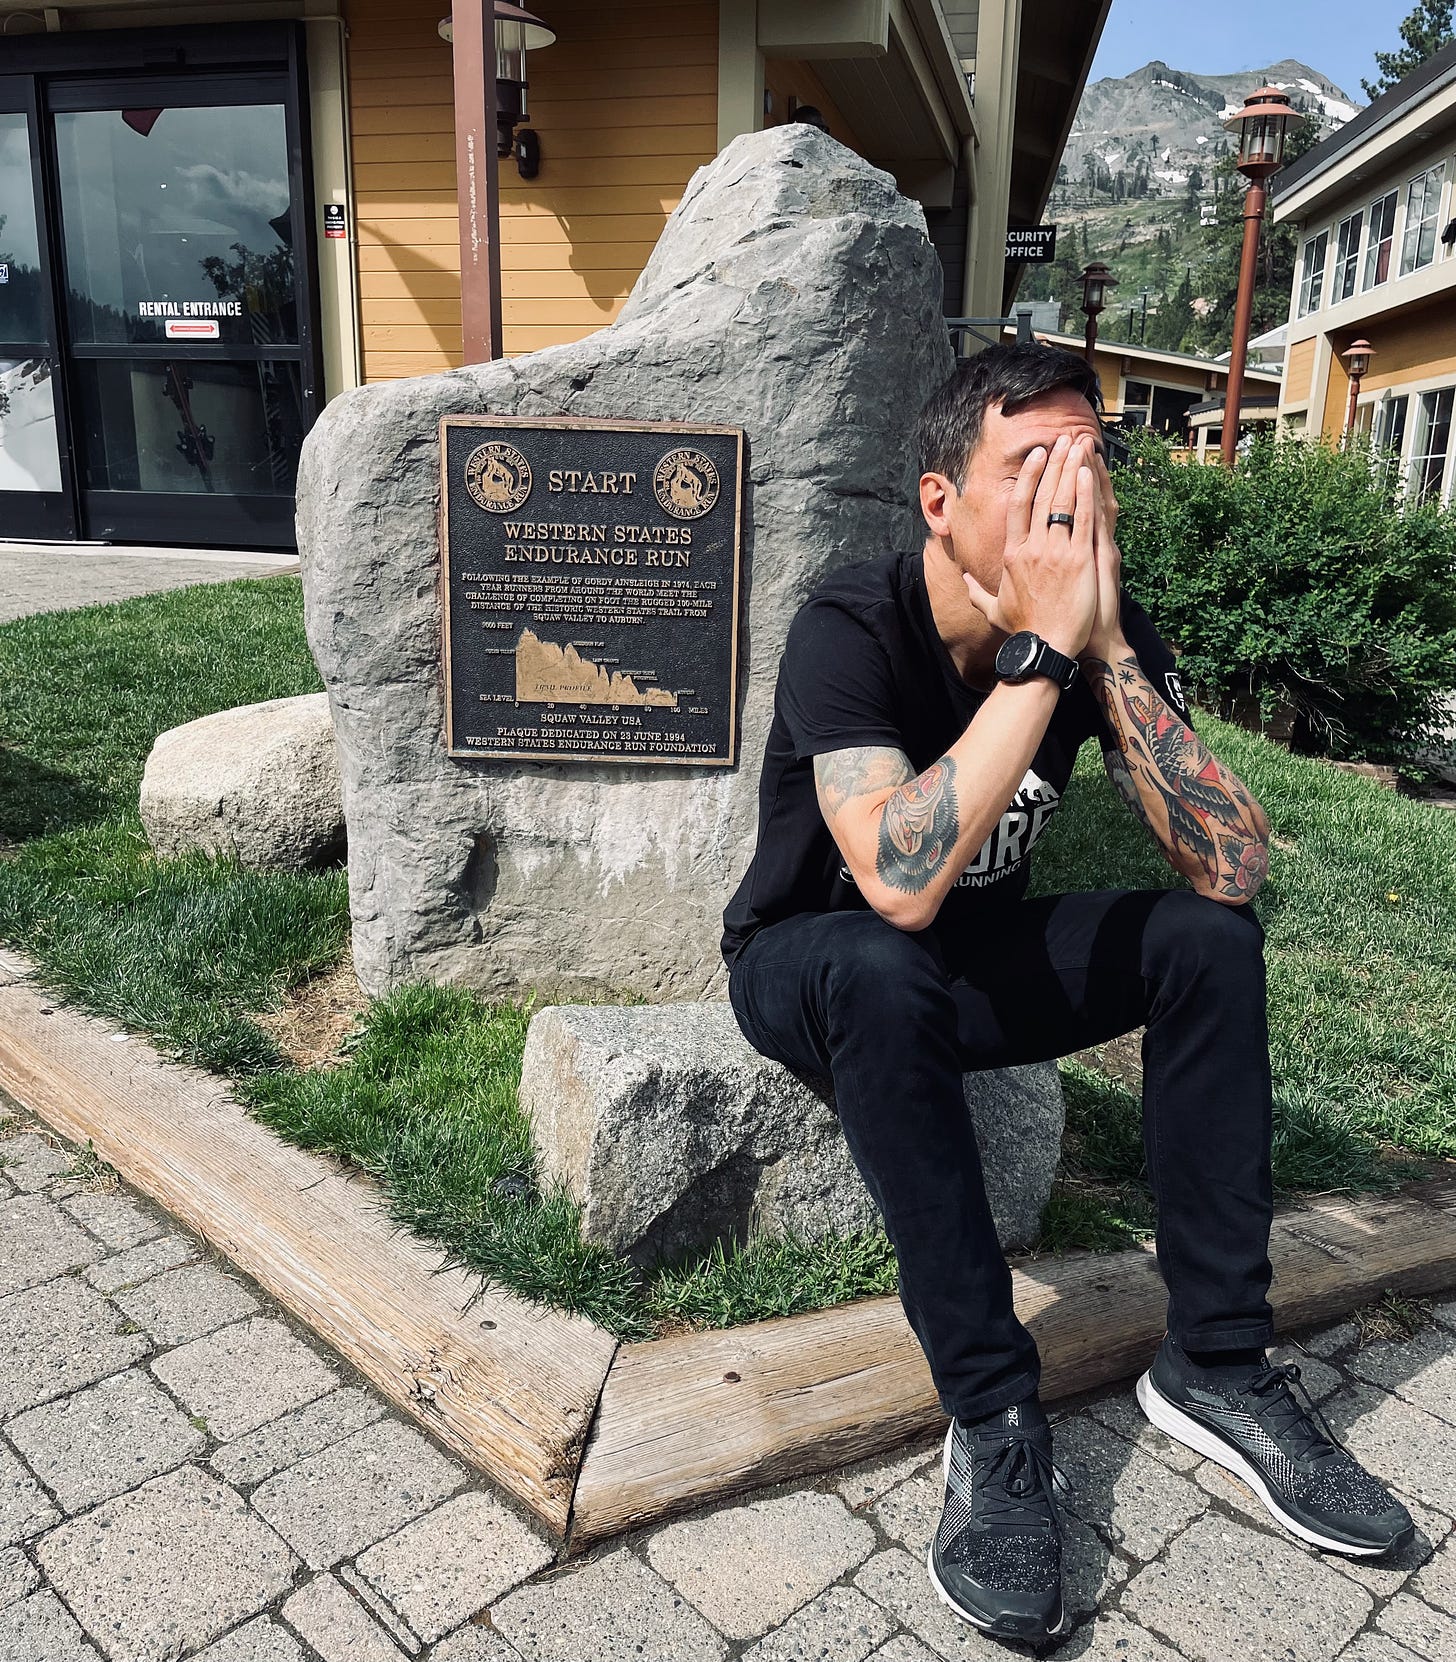 The author sitting in front of a western states memorial plaque being desperate